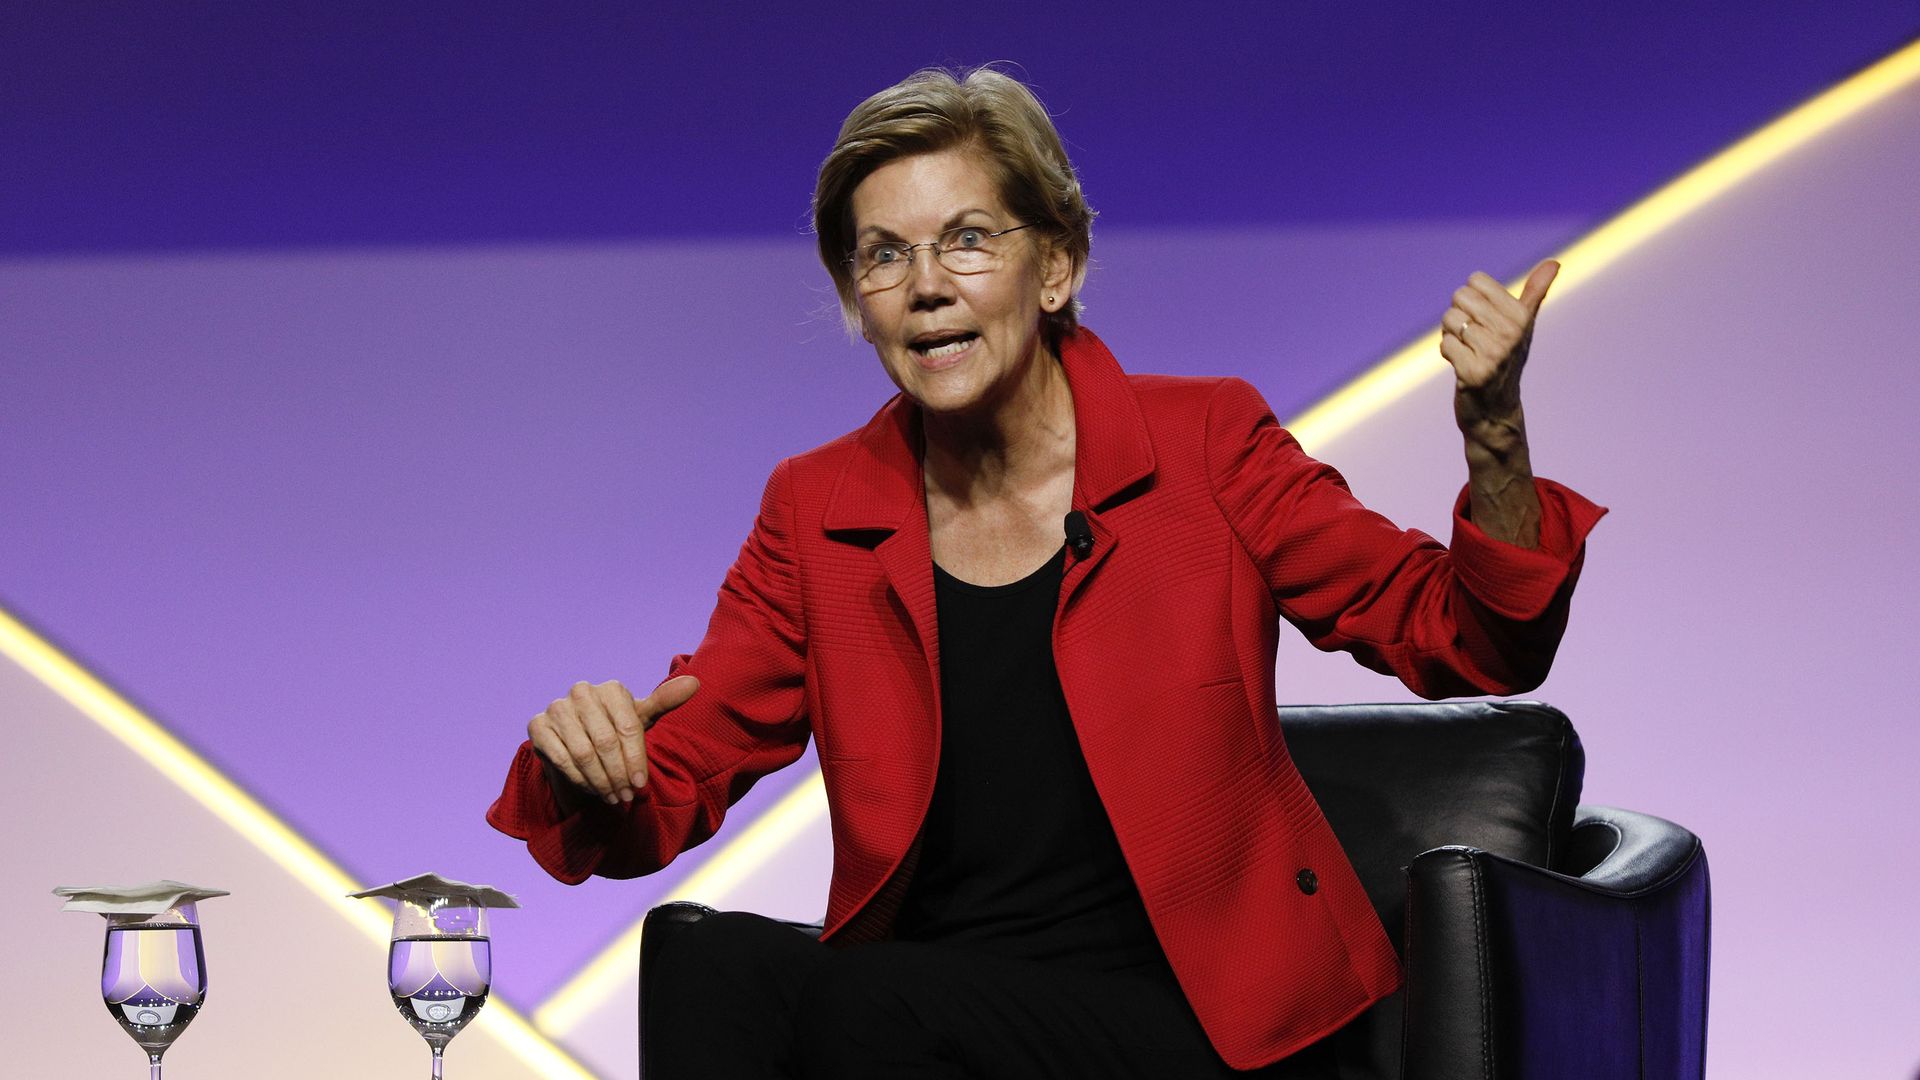 Democratic presidential candidate U.S. Sen. Elizabeth Warren (D-MA) participates in a Presidential Candidates Forum at the NAACP 110th National Convention on July 24, 2019 in Detroit, Michigan.